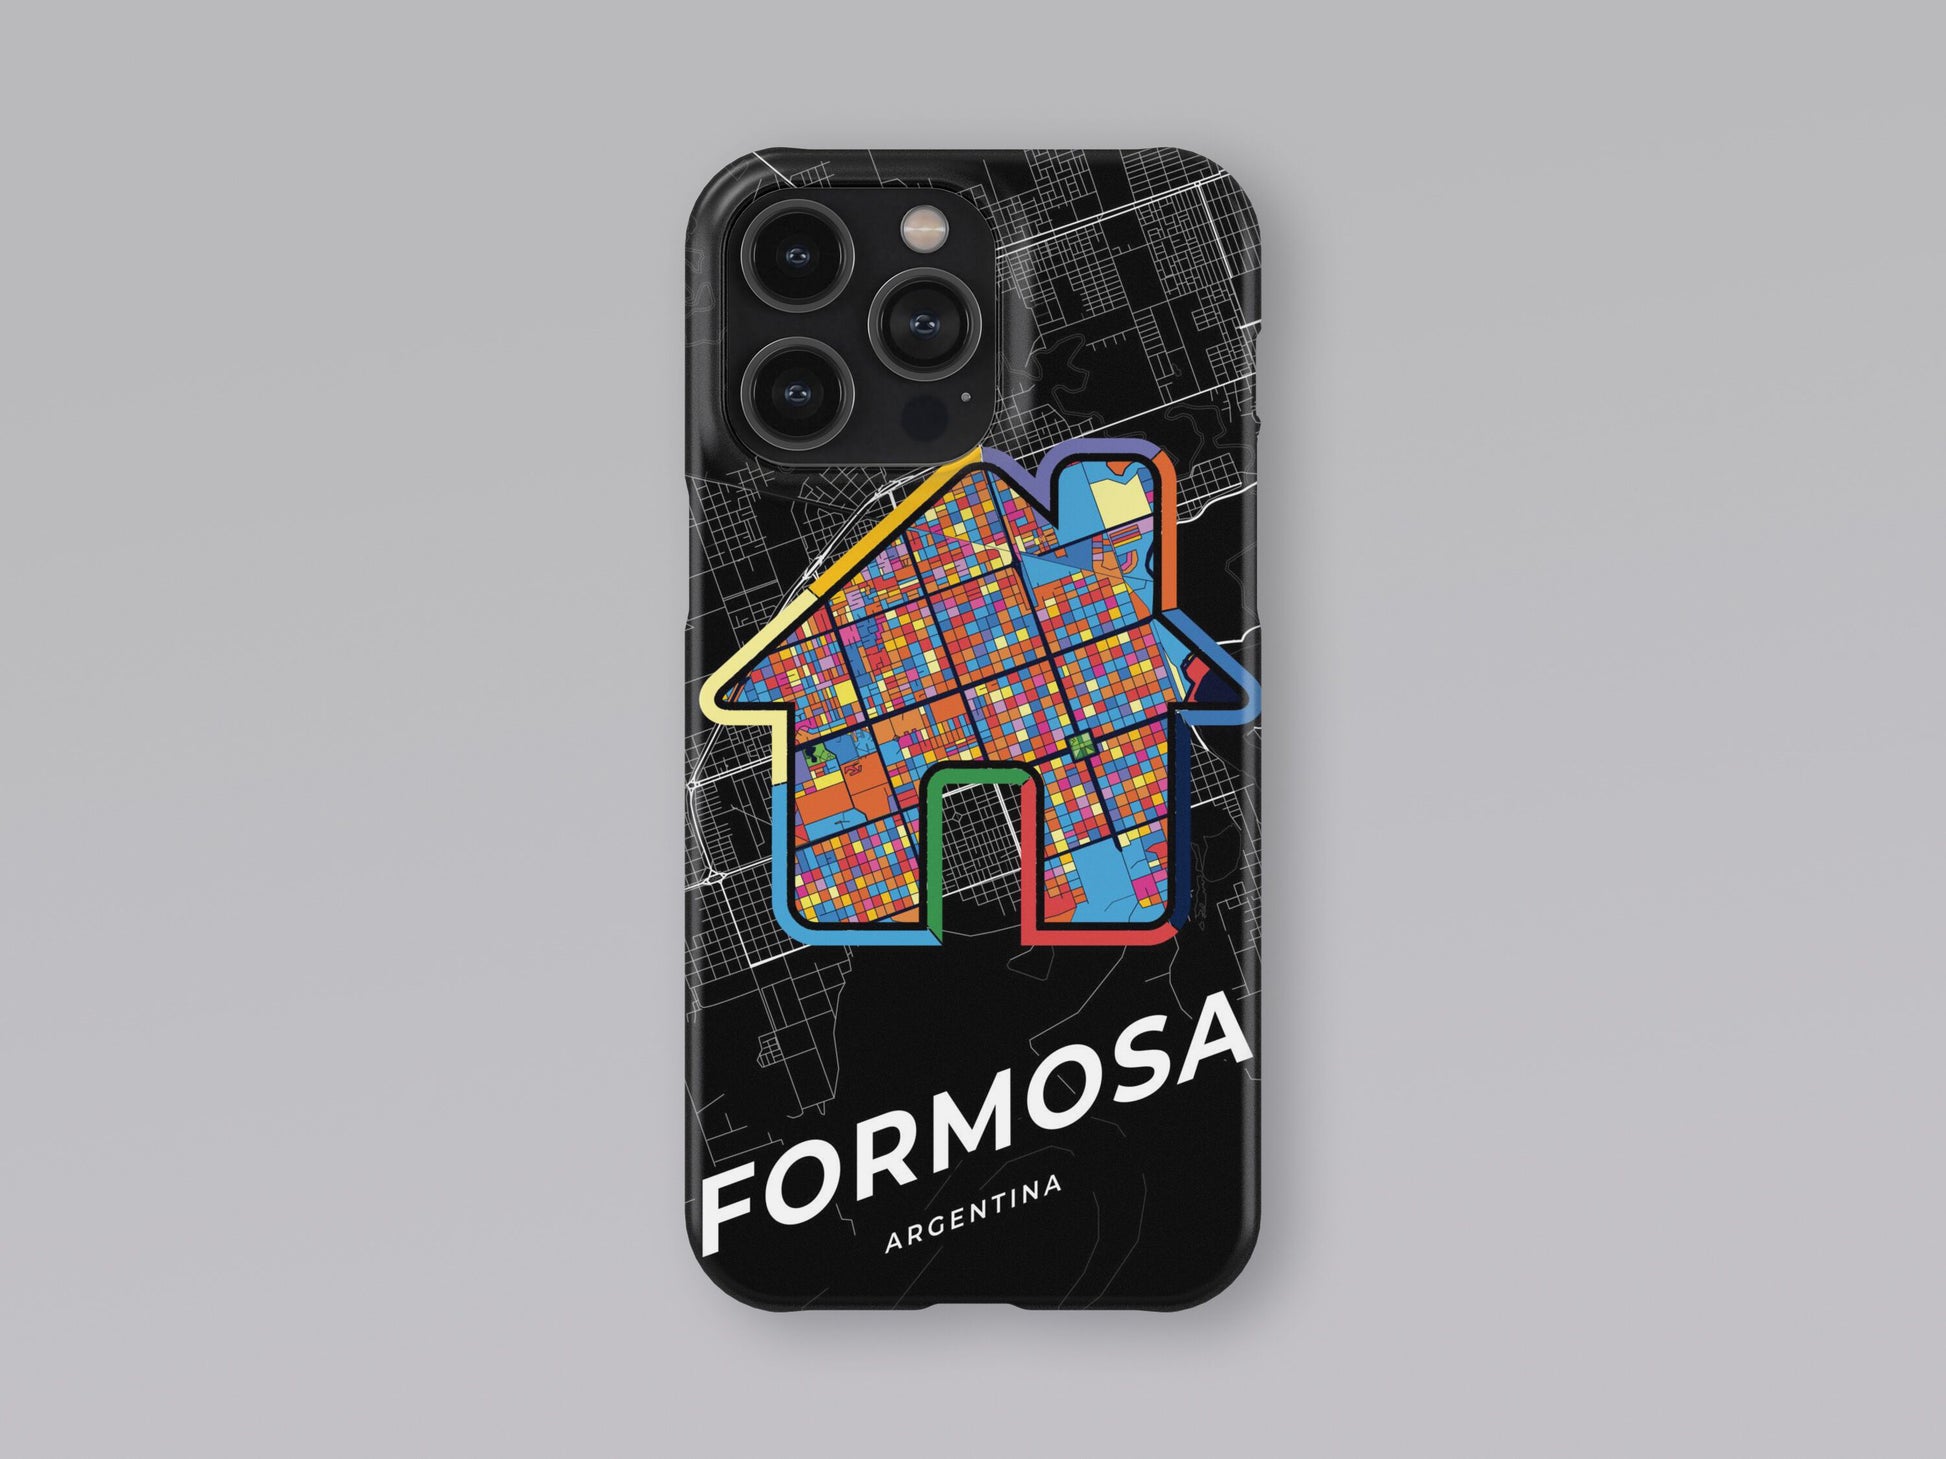 Formosa Argentina slim phone case with colorful icon. Birthday, wedding or housewarming gift. Couple match cases. 3